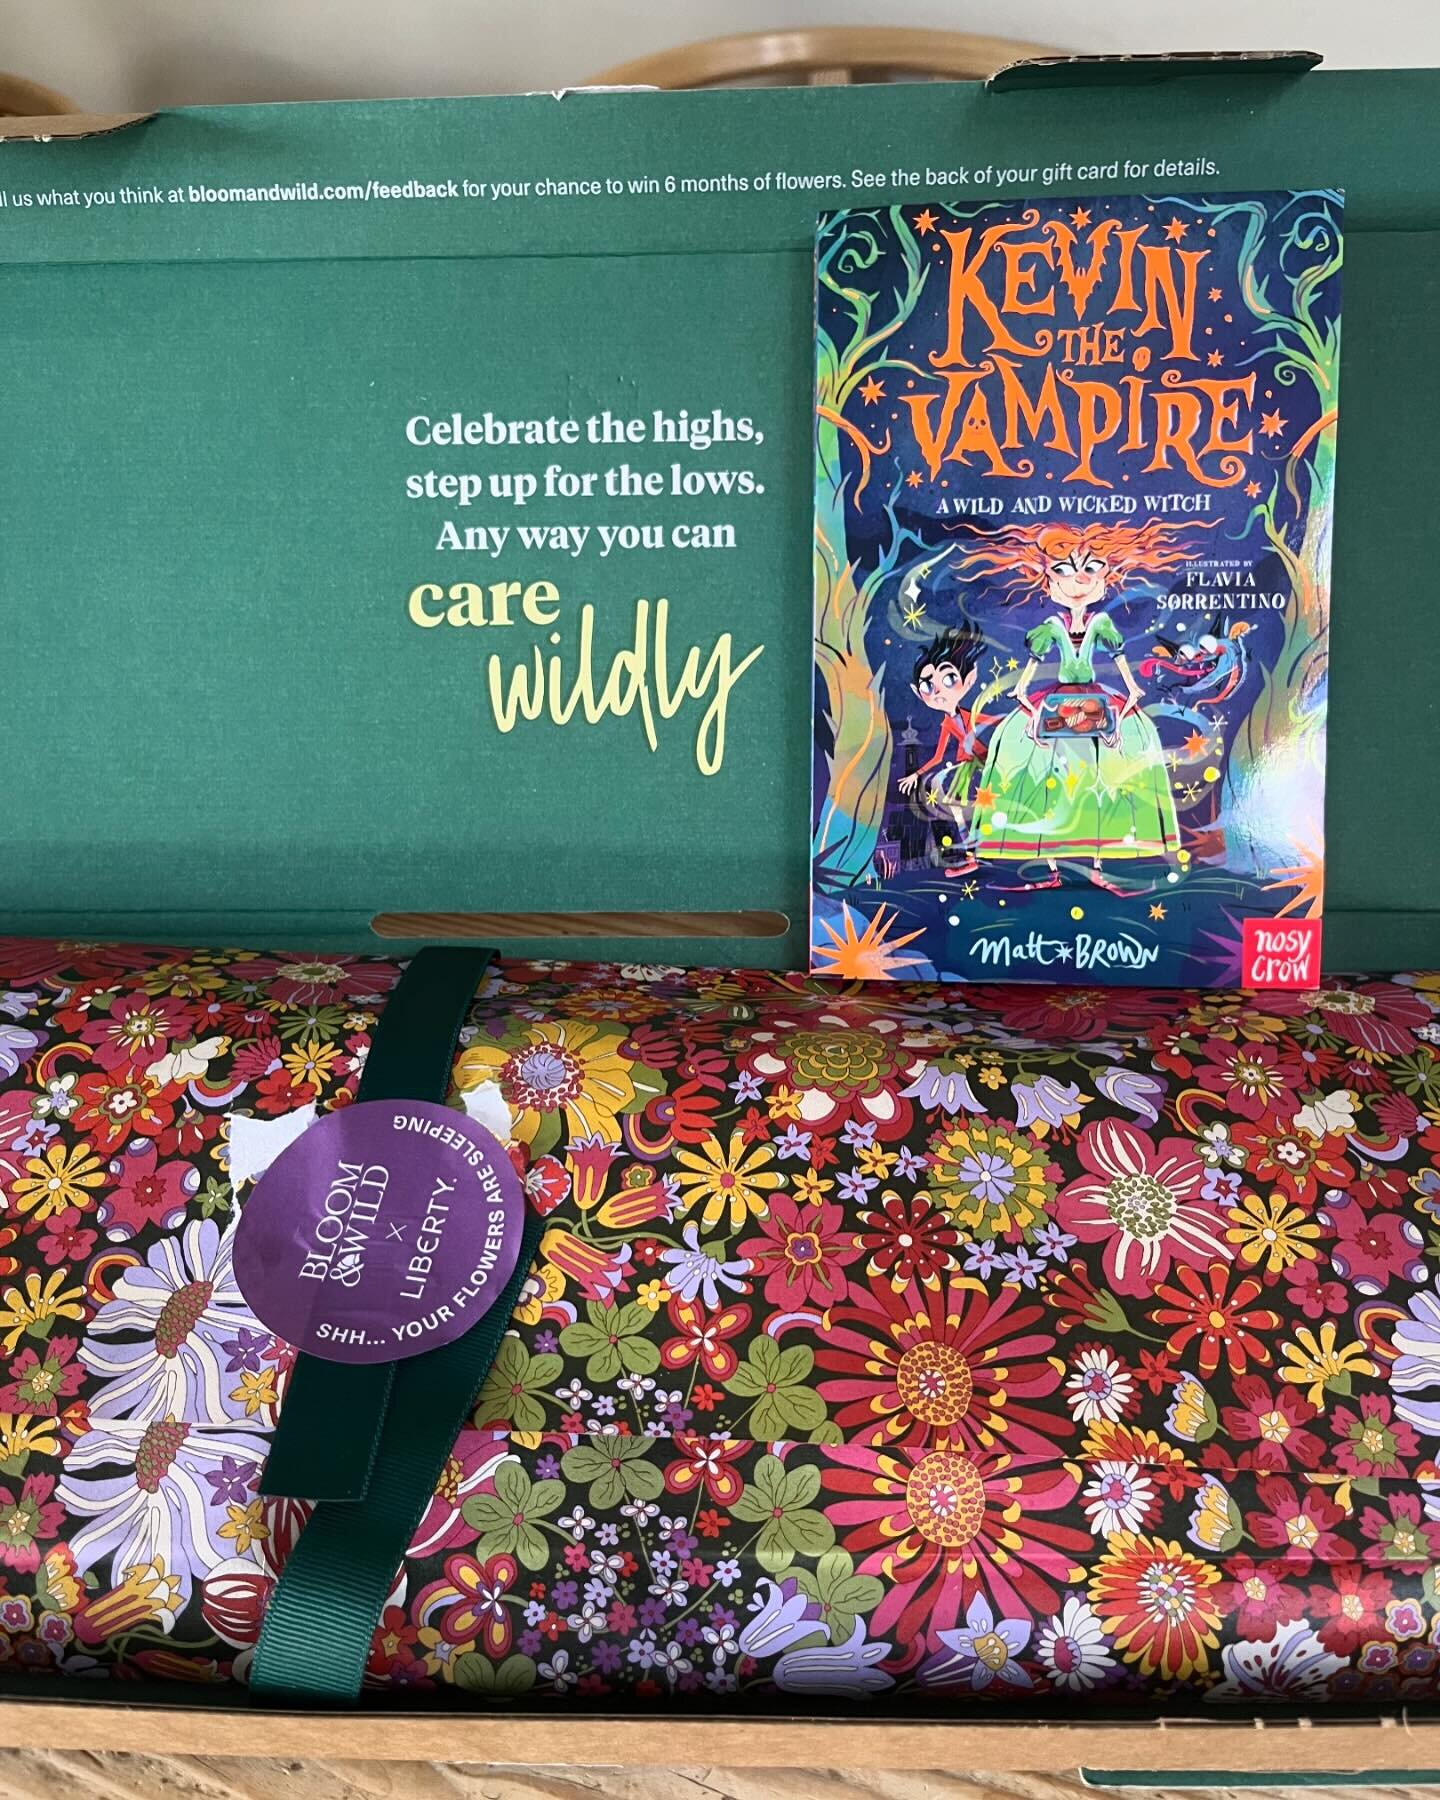 A beautiful publication day gift from my awesome agent @jen_savill and the fabulous @andrewnurnbergassociates I might not have mentioned that KEVIN THE VAMPIRE: A WILD AND WICKED WITCH is now available wherever you love to buy books. Thank you Jenny 